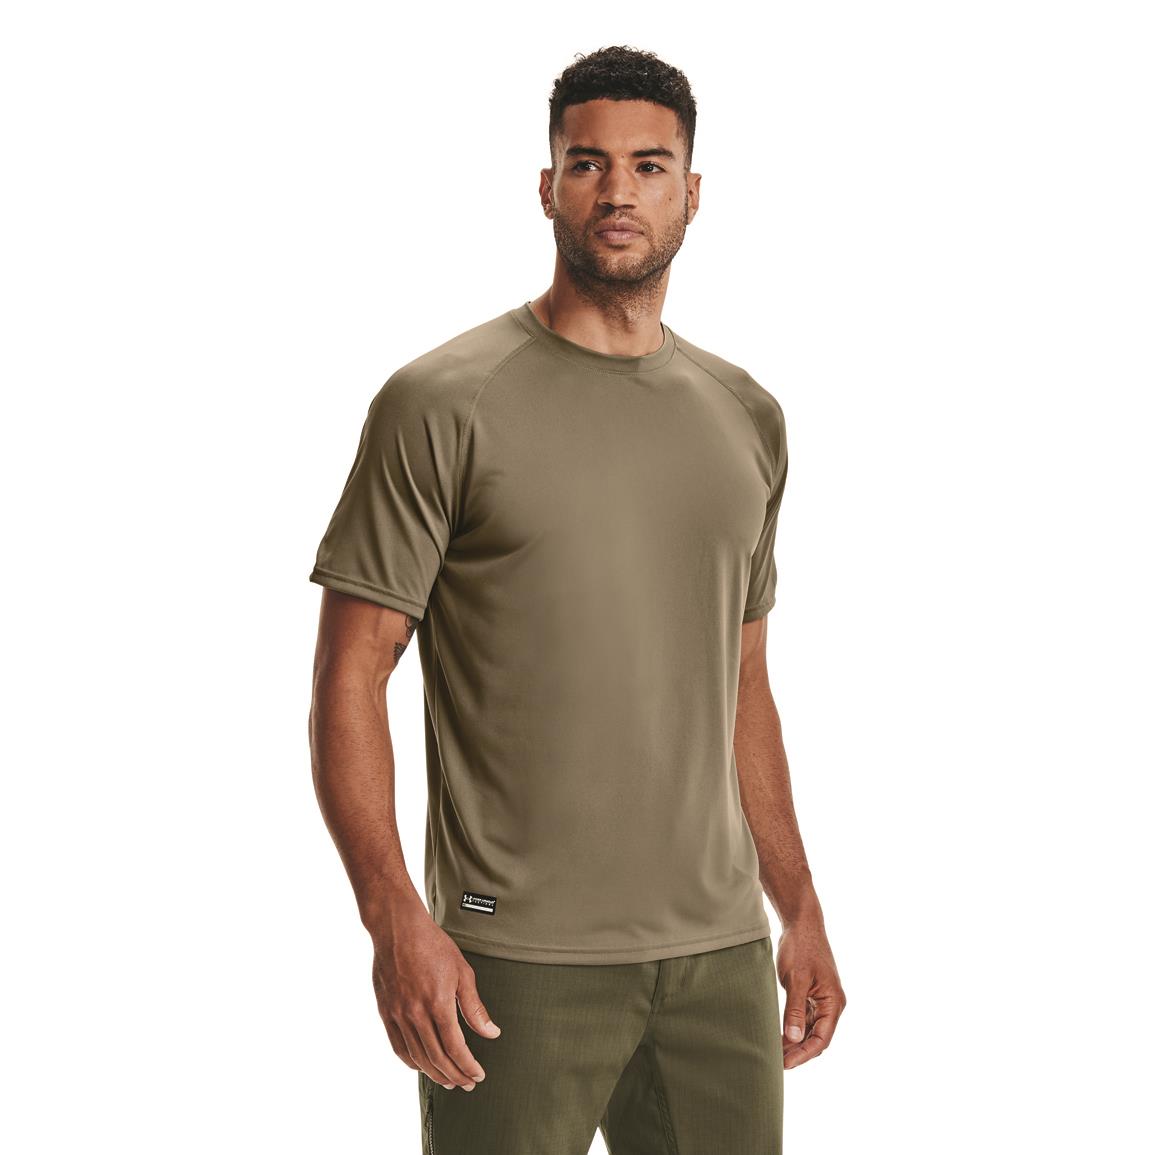 U.S. Military Surplus Midweight T-Shirts, 3 Pack, New - 732121 ...